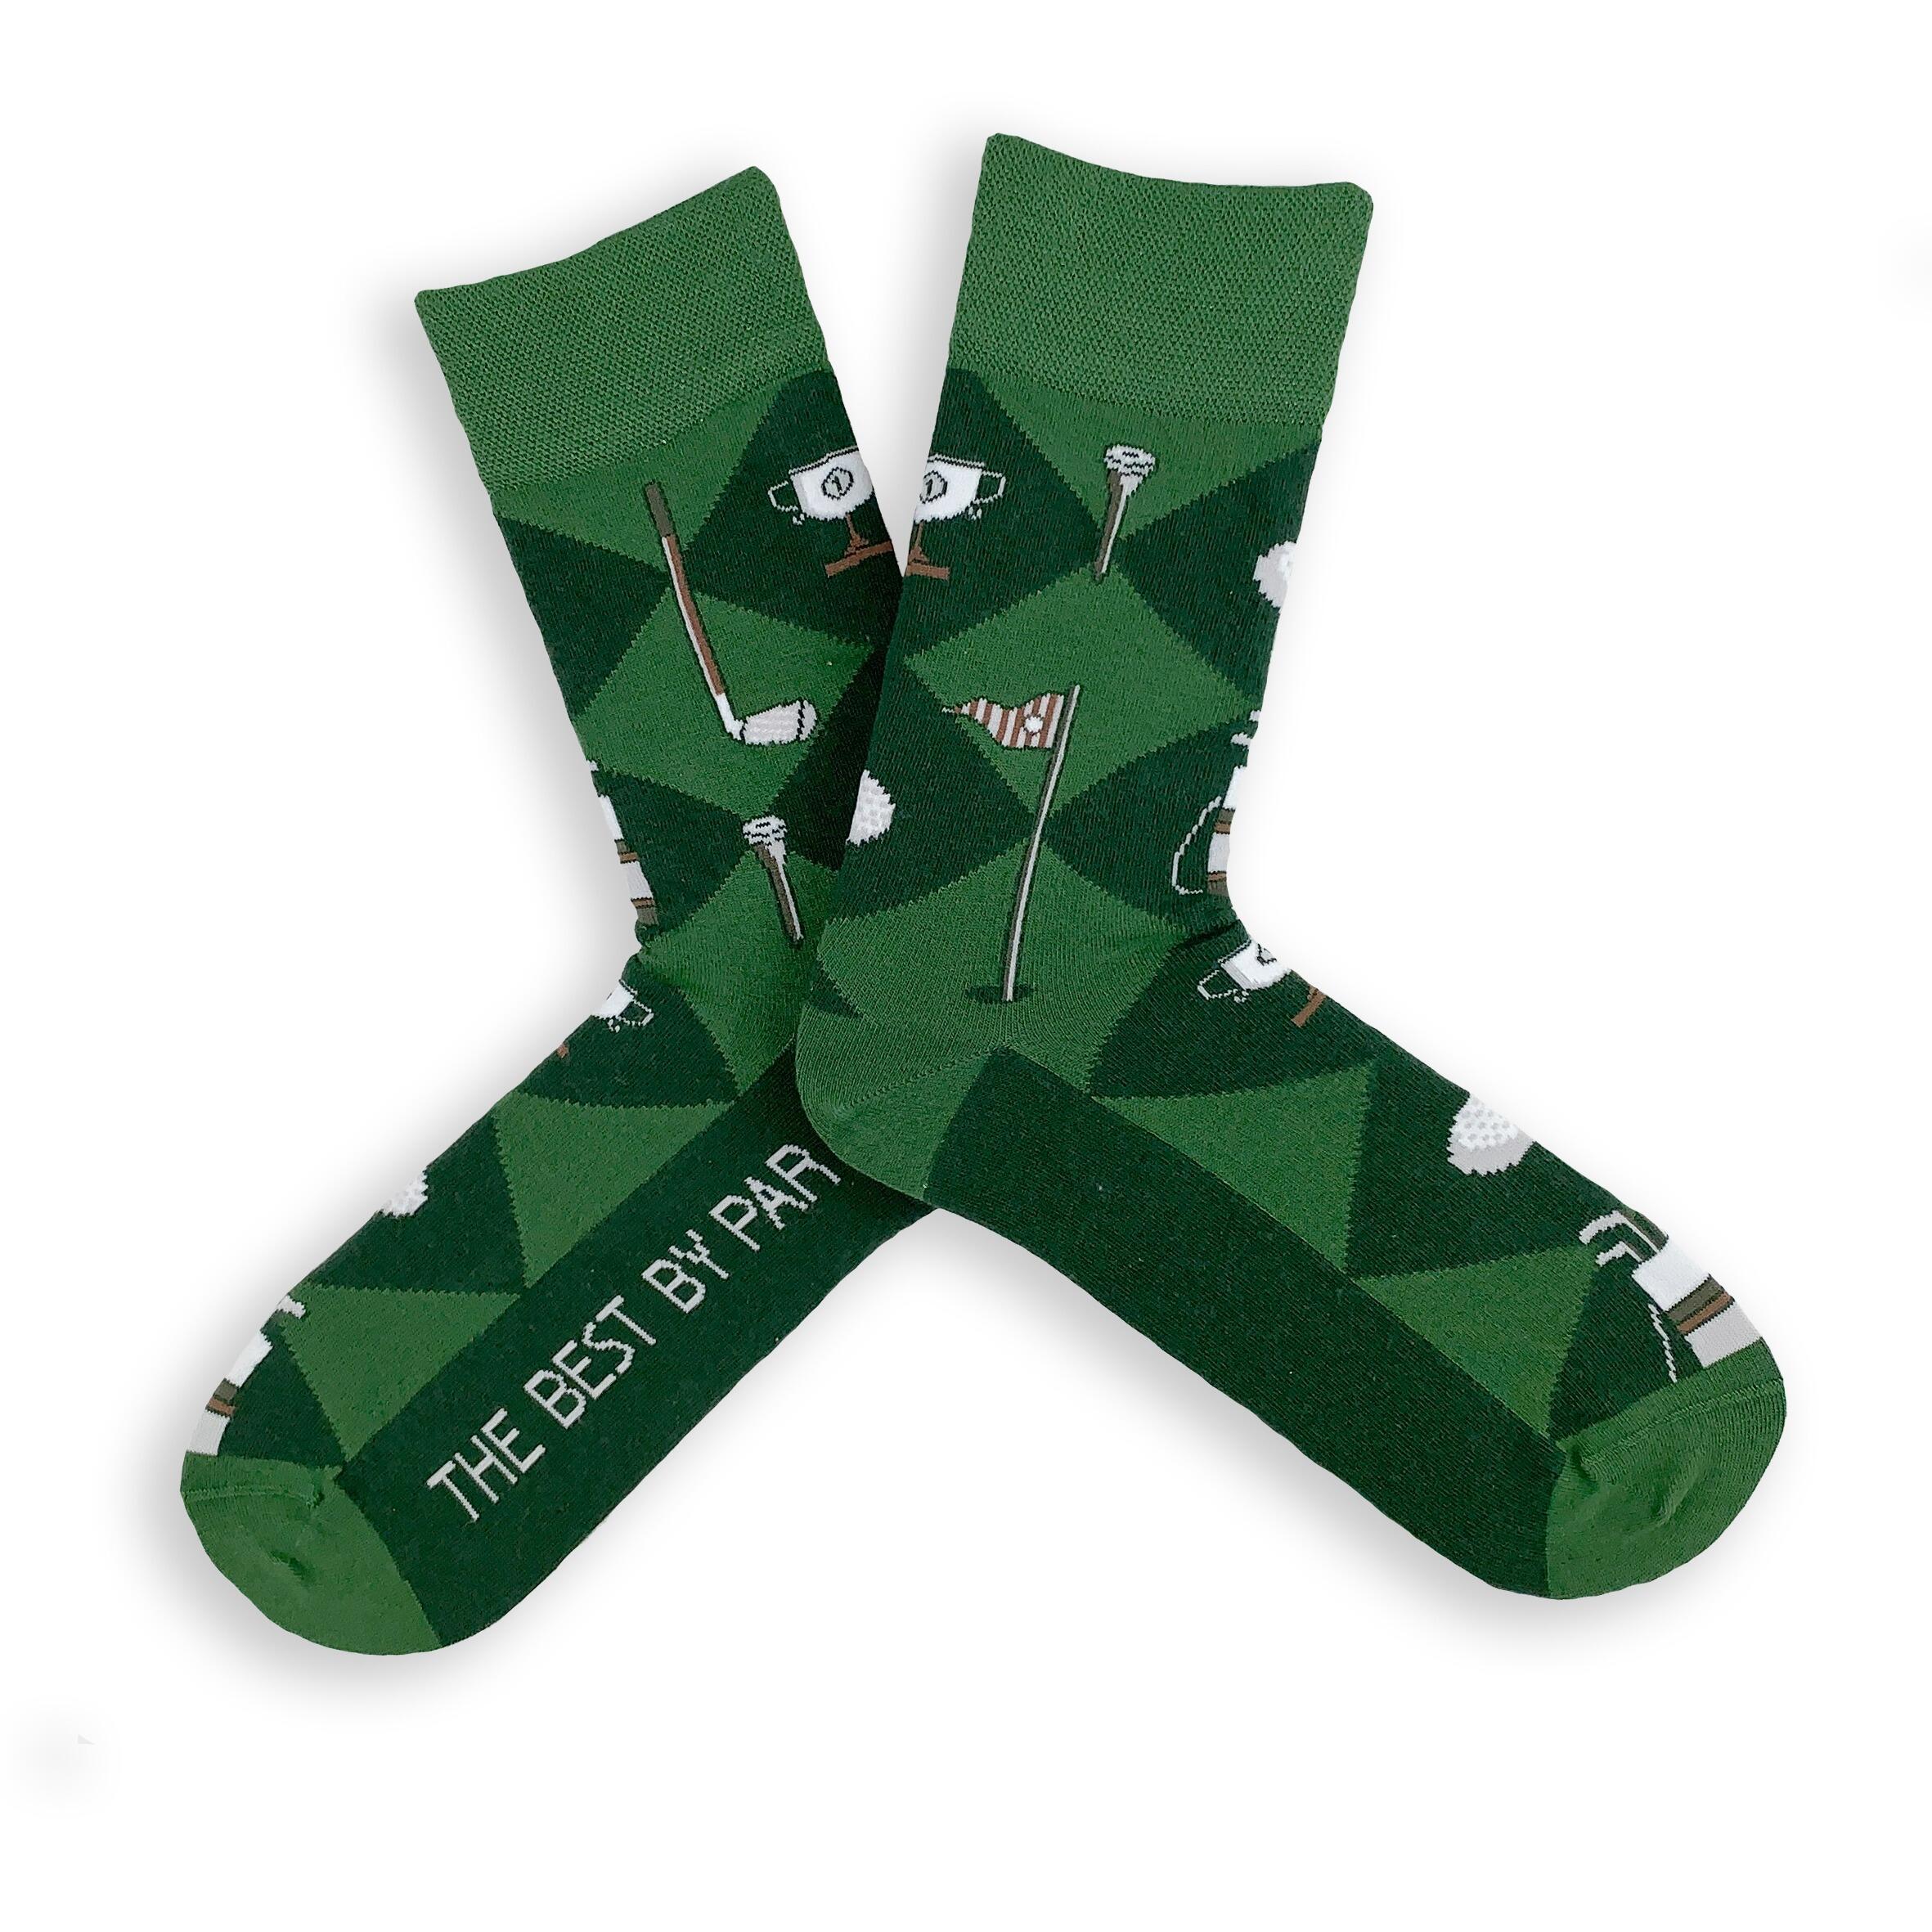 Unique bamboo golf lover socks for men and women - the best by par...